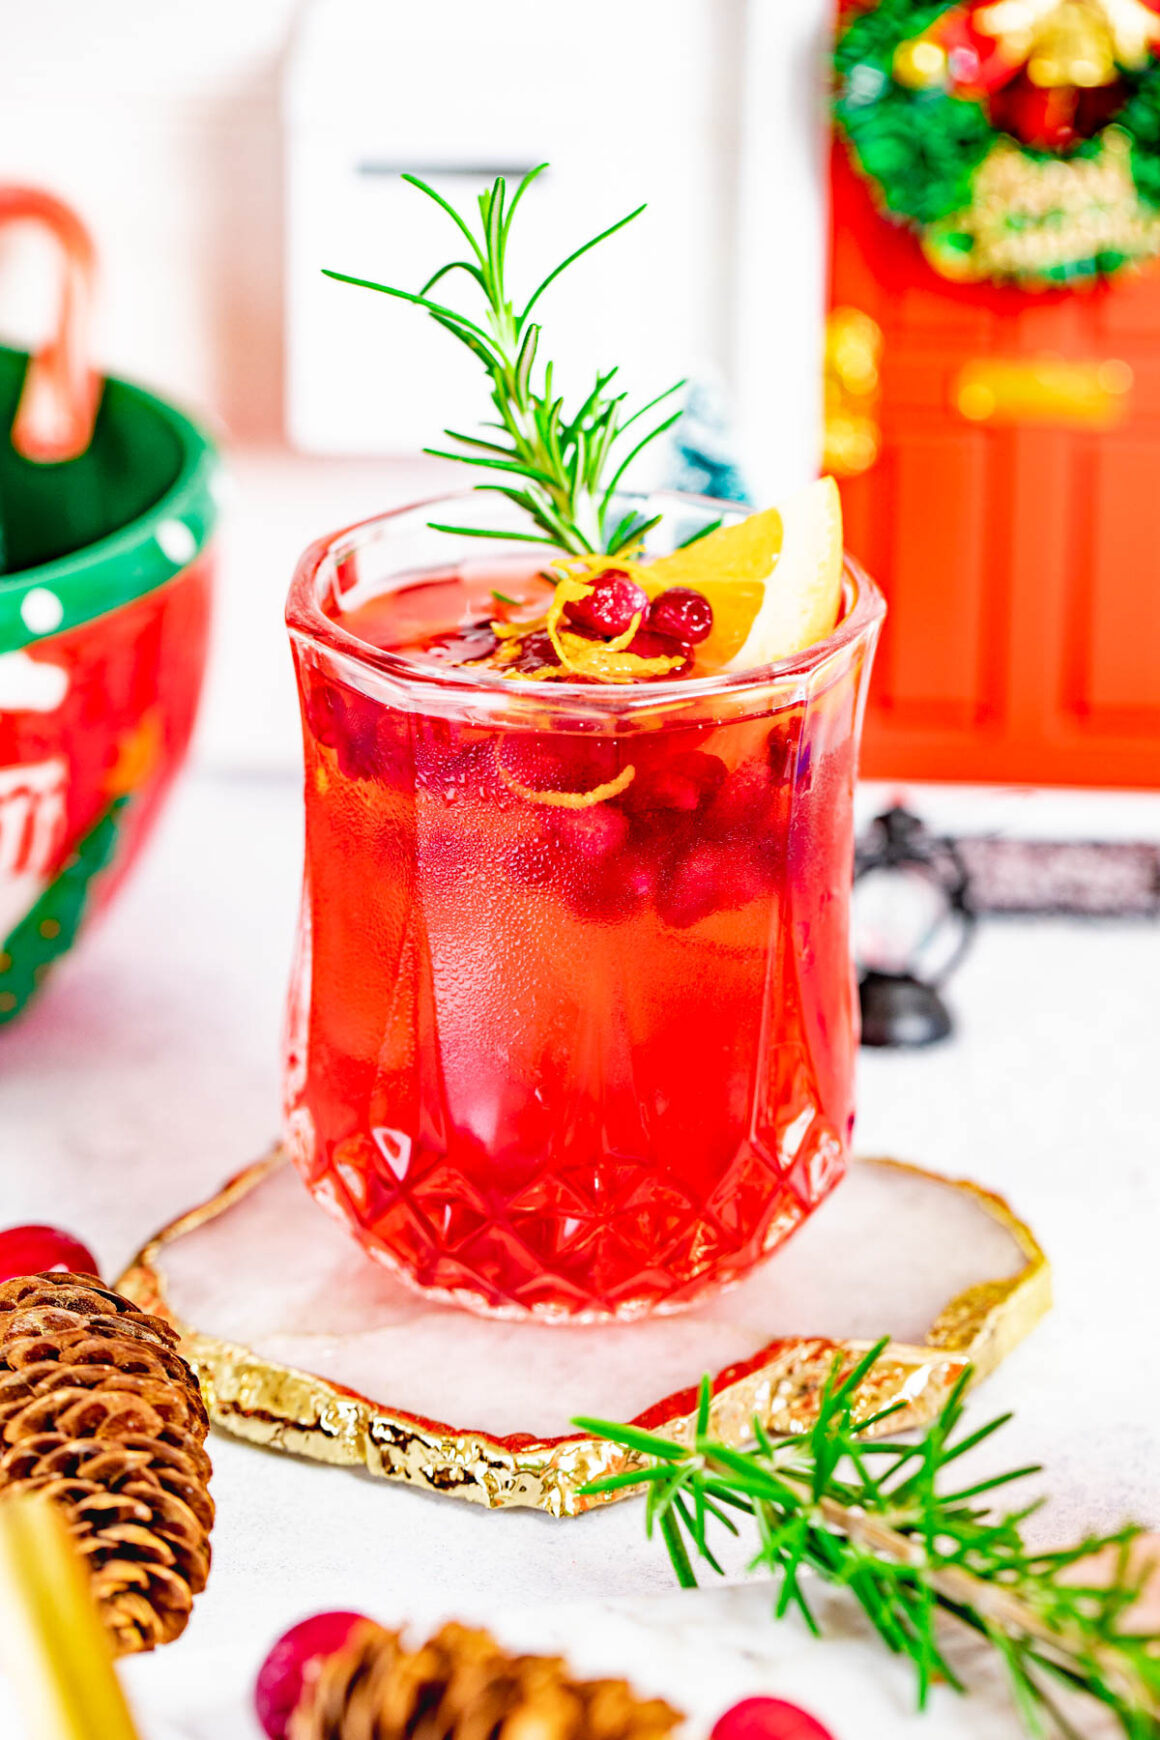 This is a delicious and festive drink suitable for any holiday celebration.